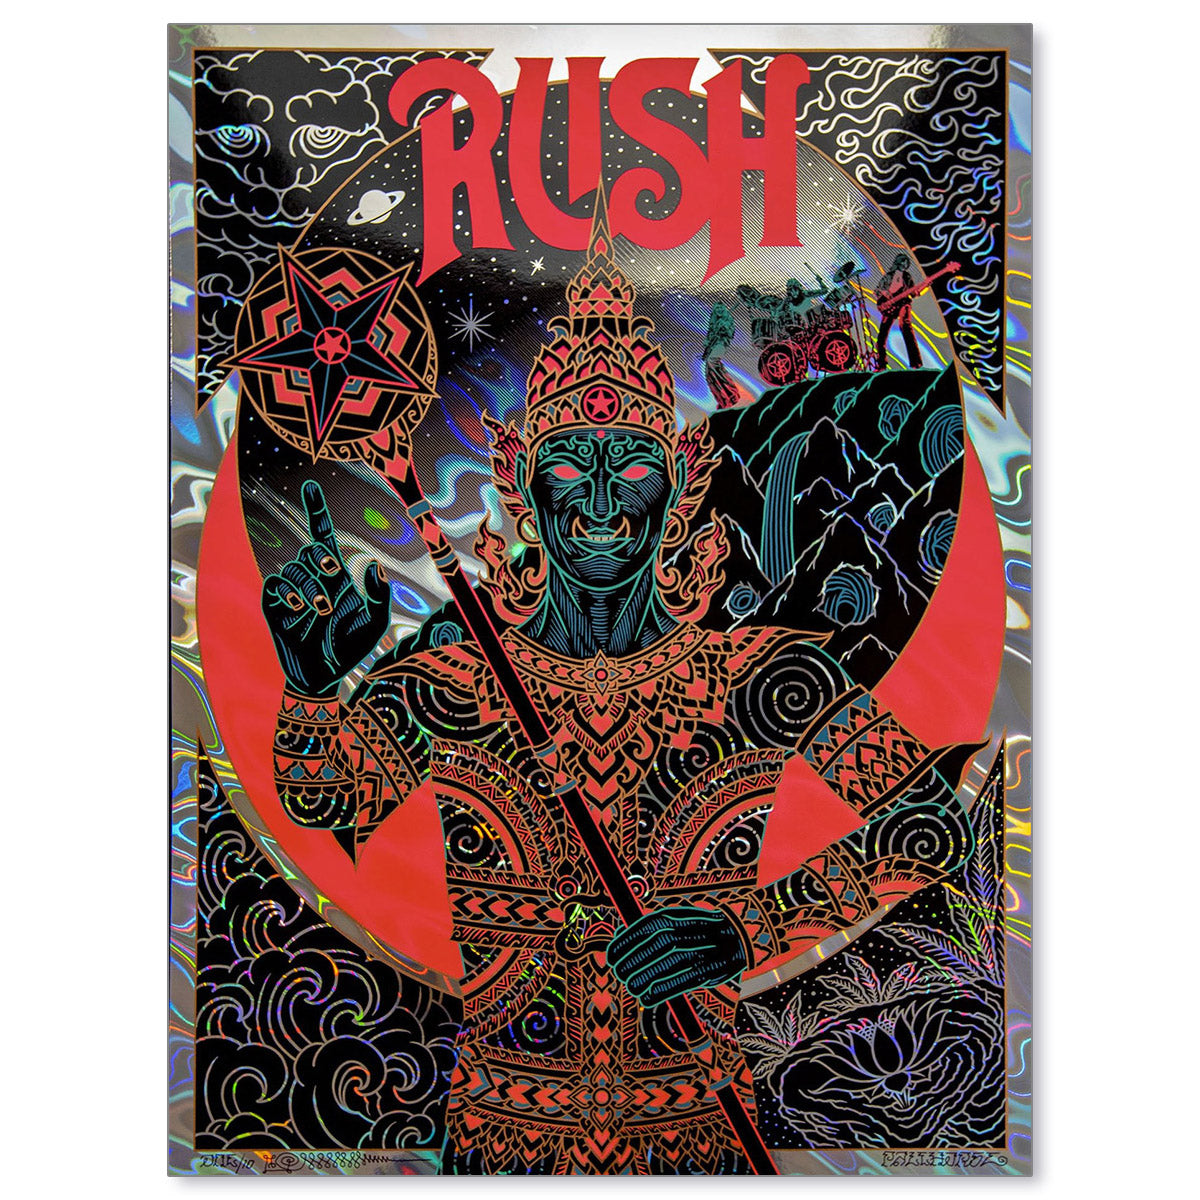 Rush - 2112: II. 'The Temples of Syrinx' by Palehorse (2112 Day Variant)